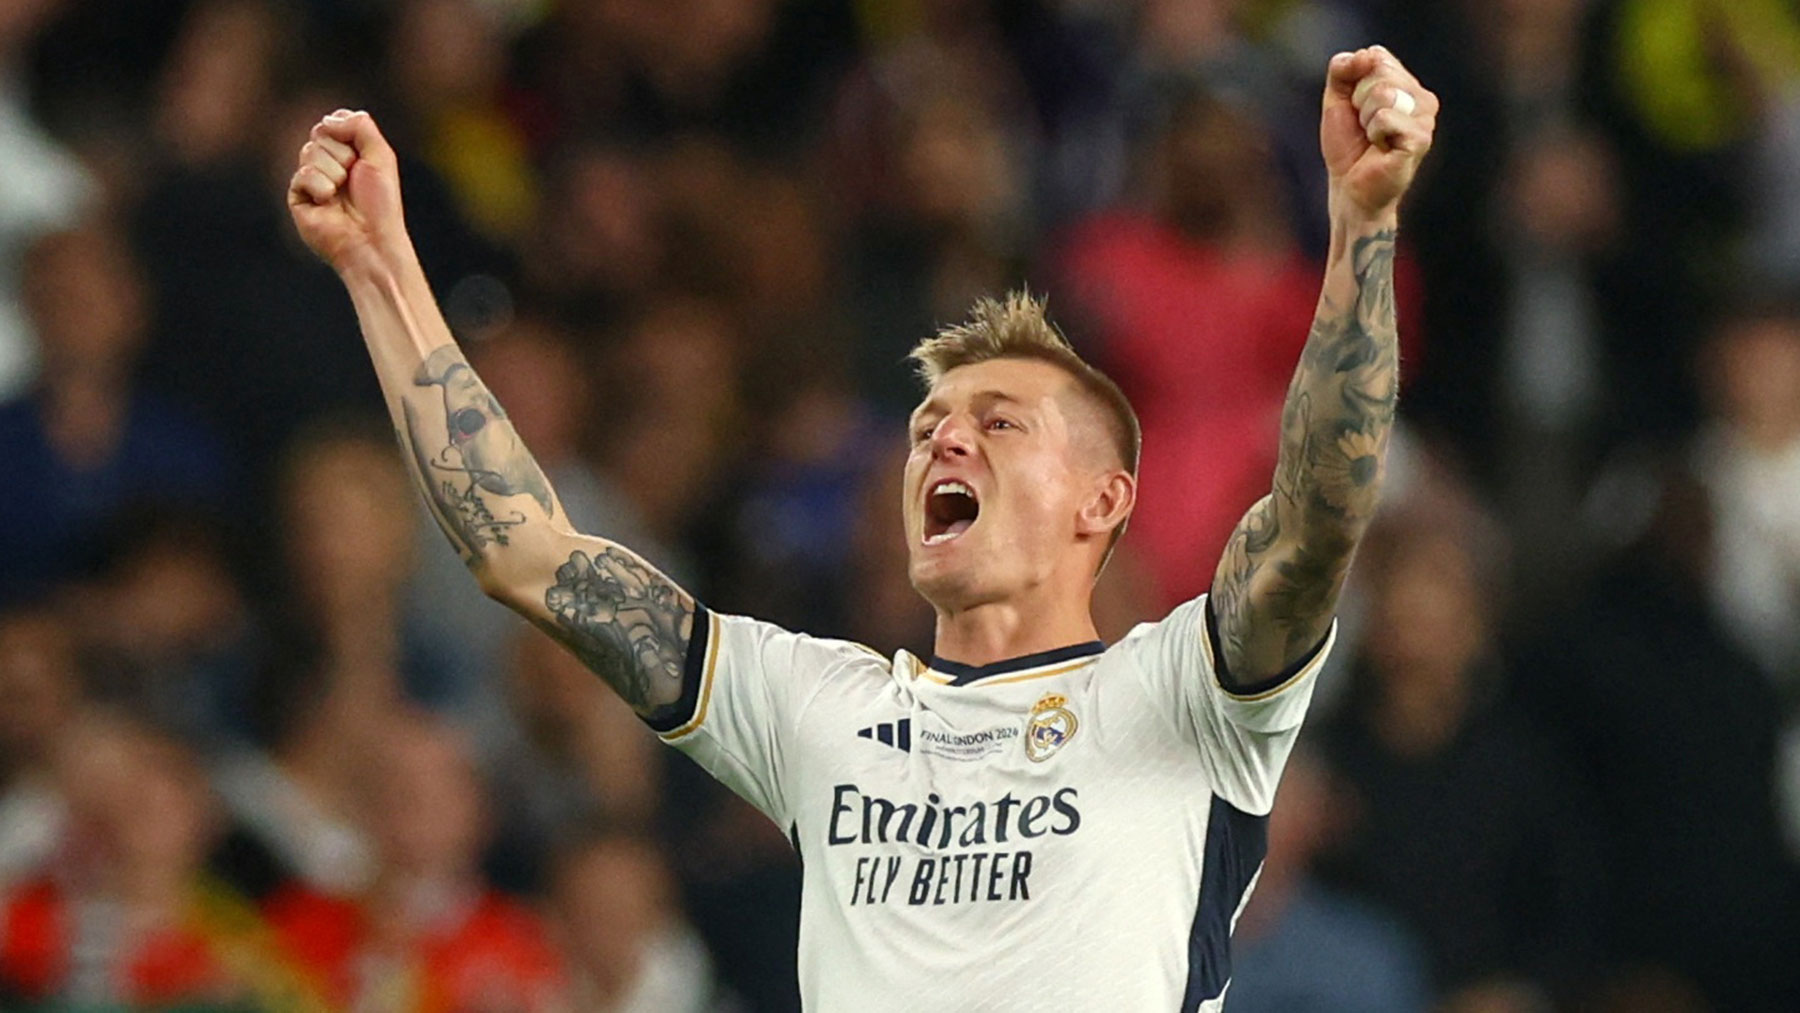 Kroos’s gesture during his substitution in the Champions League final that elevated him as a Real Madrid legend